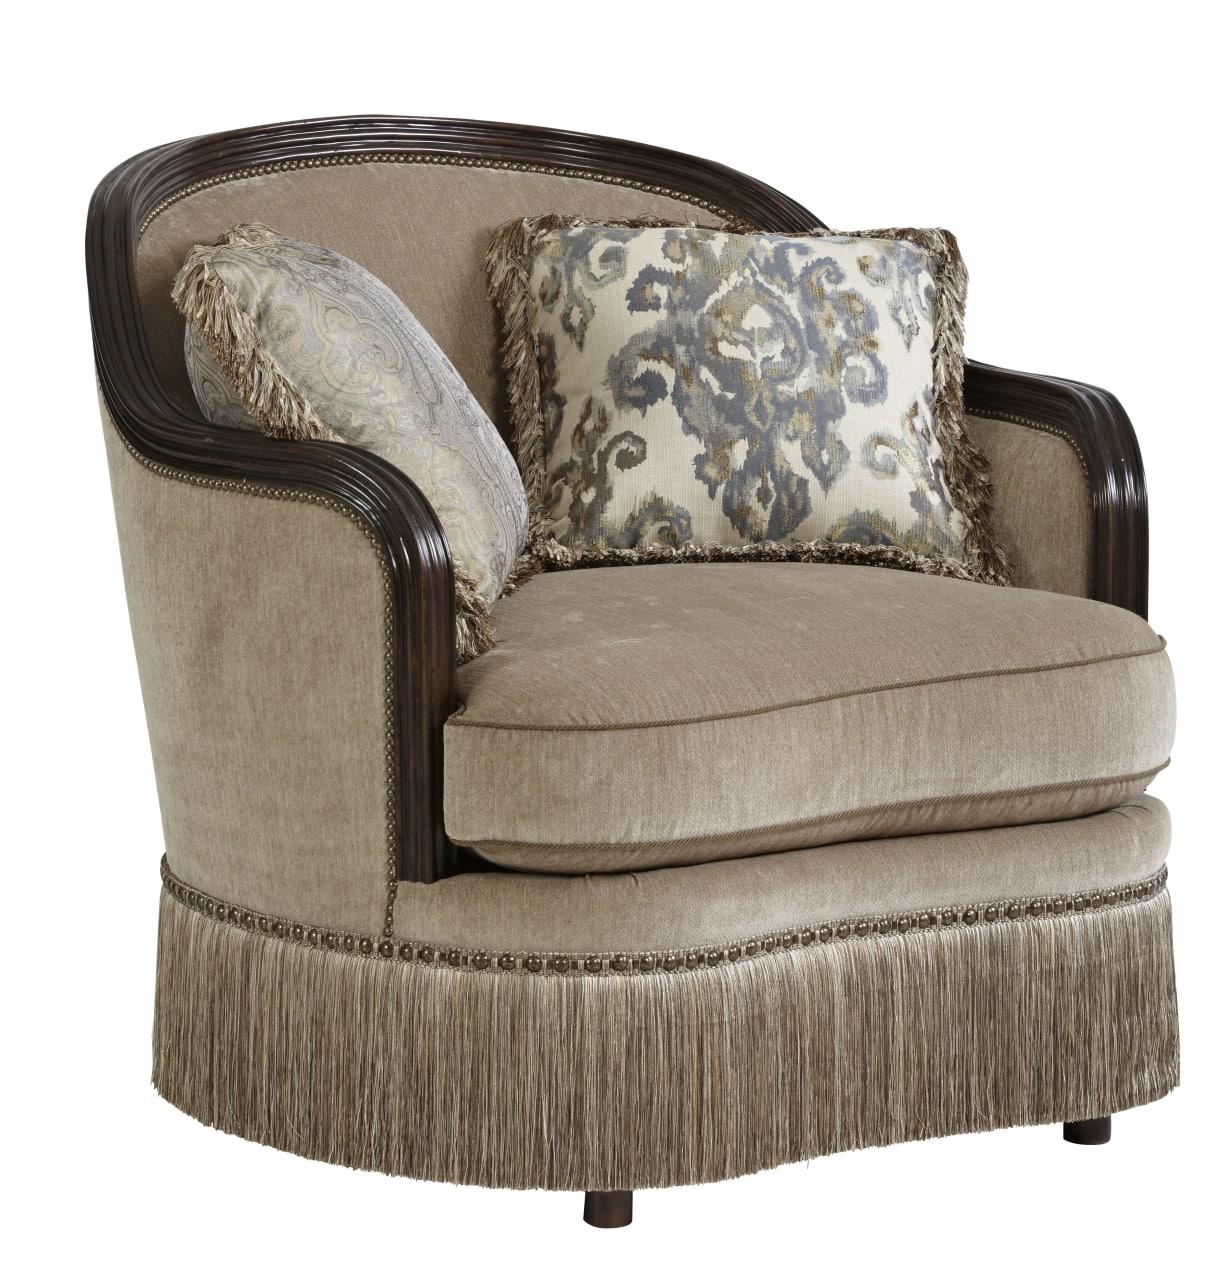 a.r.t. furniture Giovanna Living Room Chair